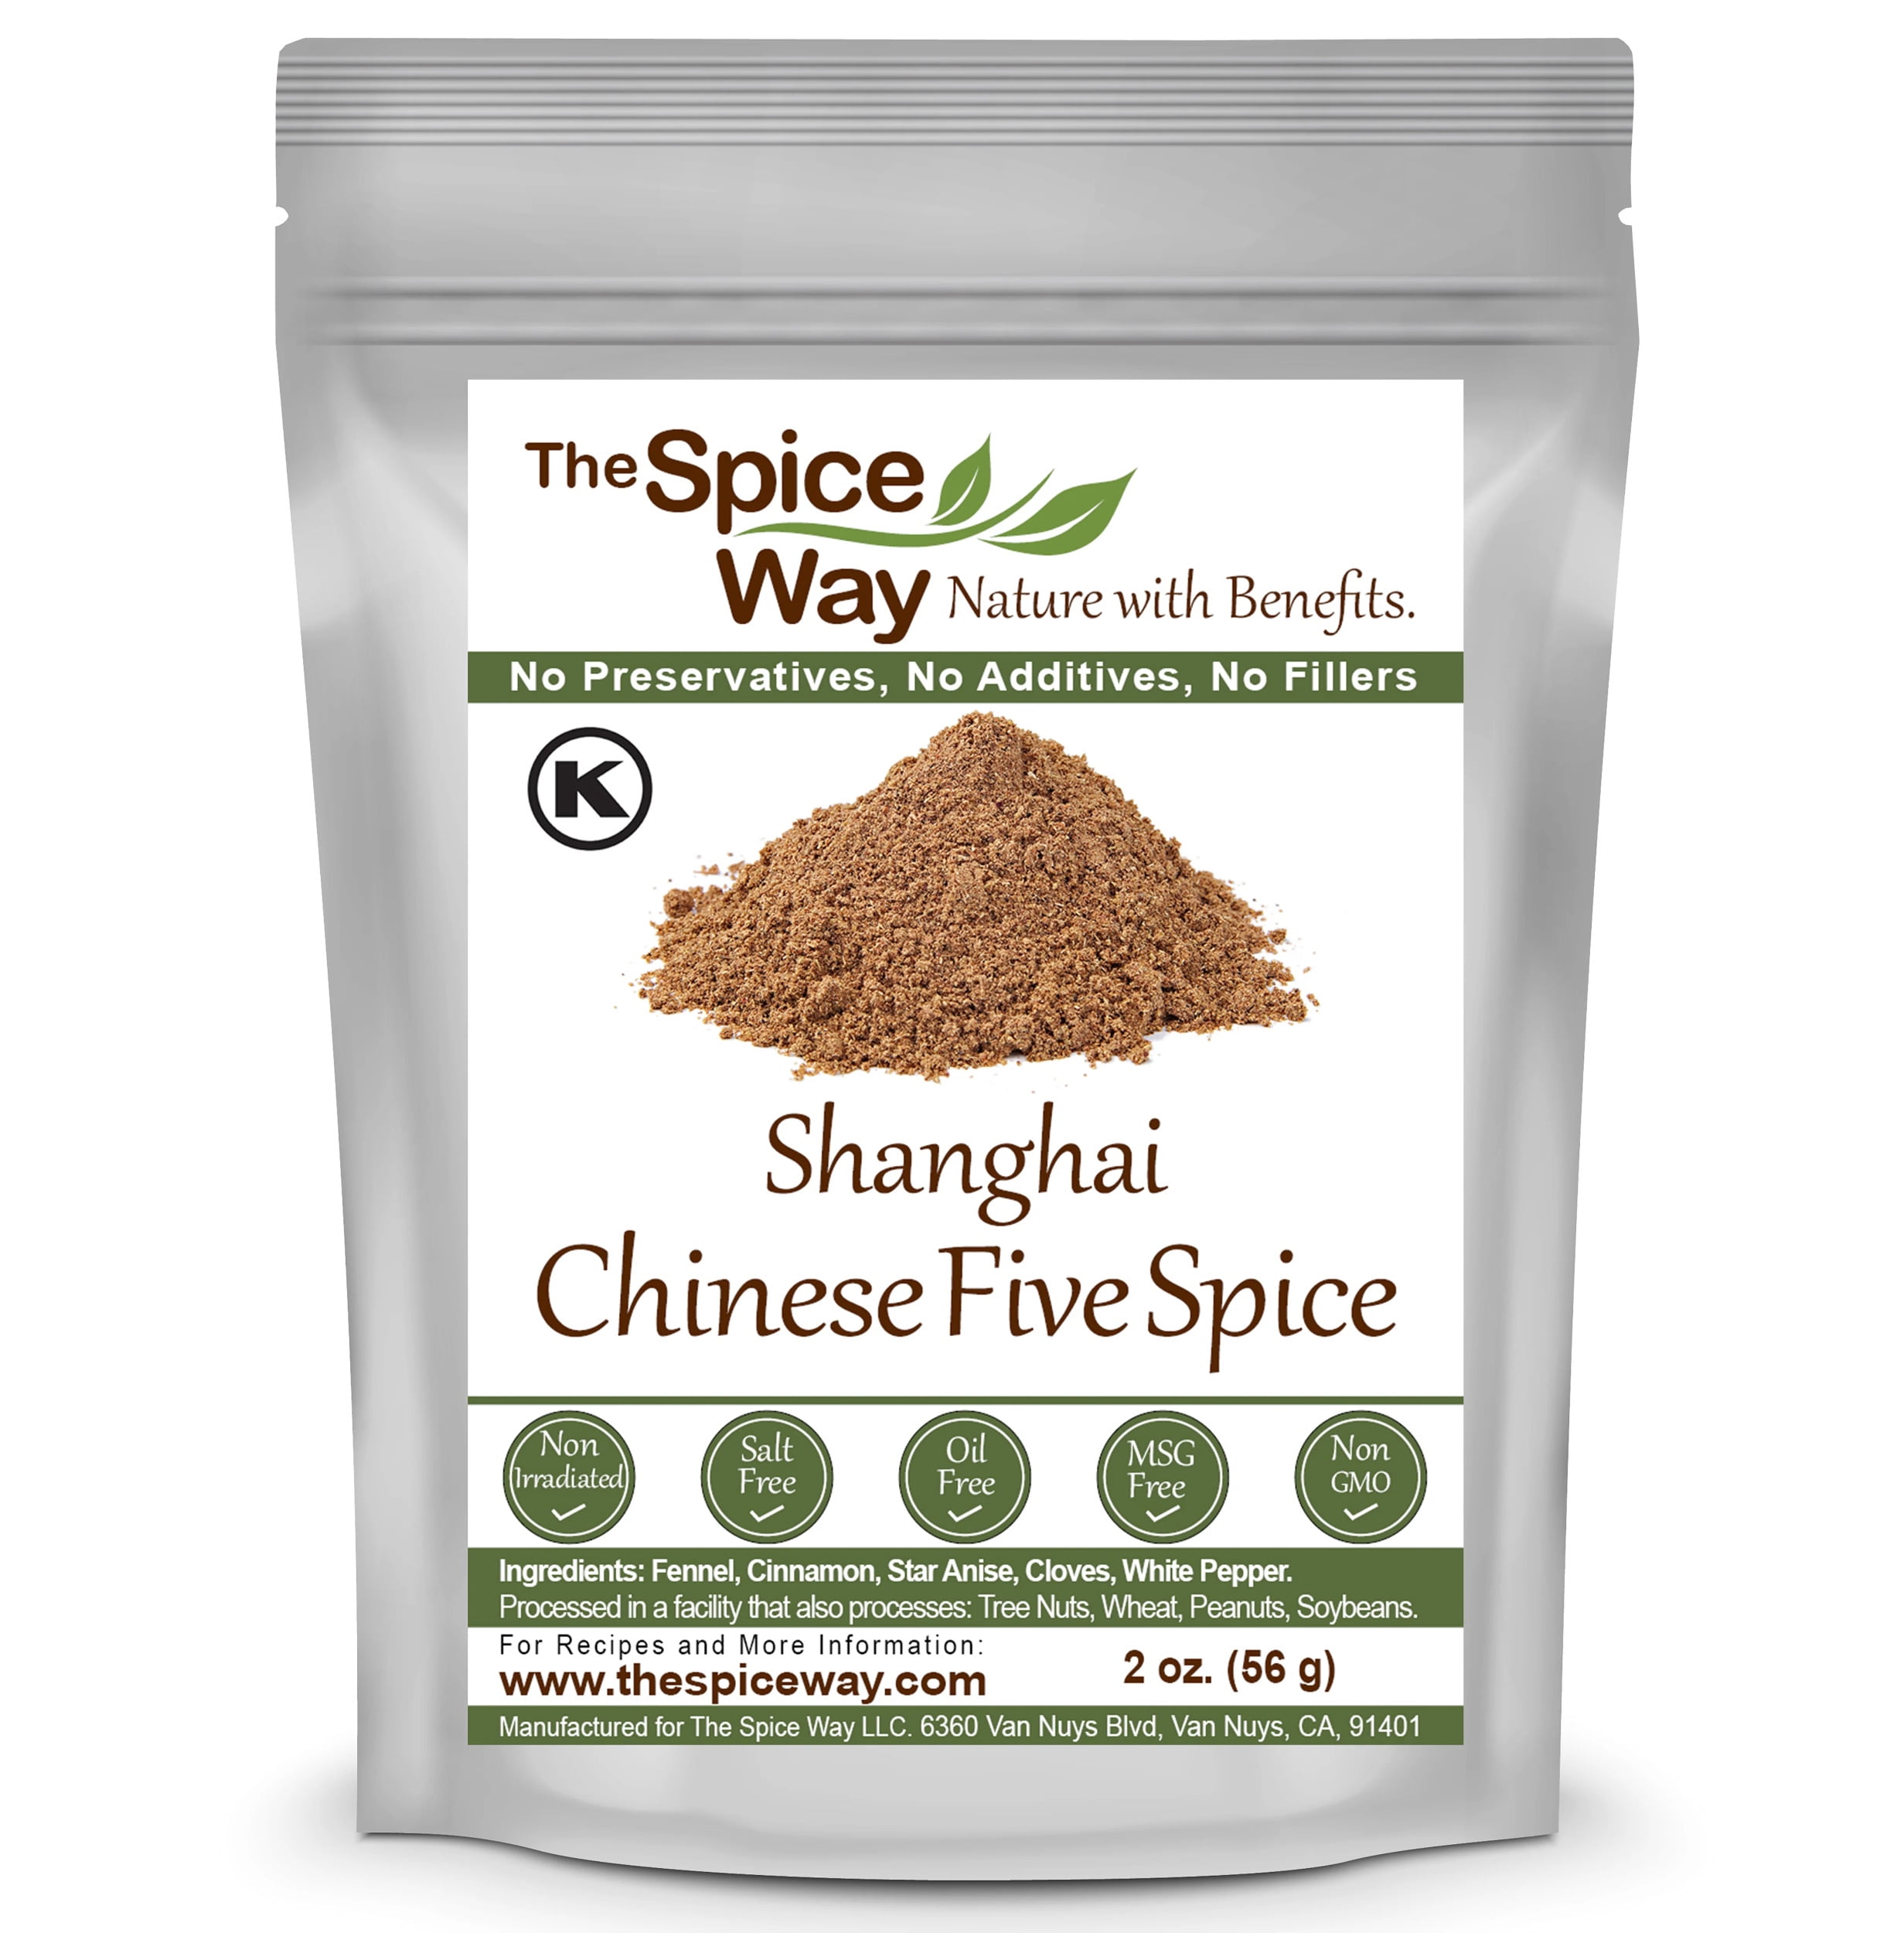 Authentic Chinese Five Spice Blend 1.05 oz, Gluten Free, All Natural Ground Chinese 5 Spice Powder, No Preservatives No MSG, Mixed Spice Seasoning